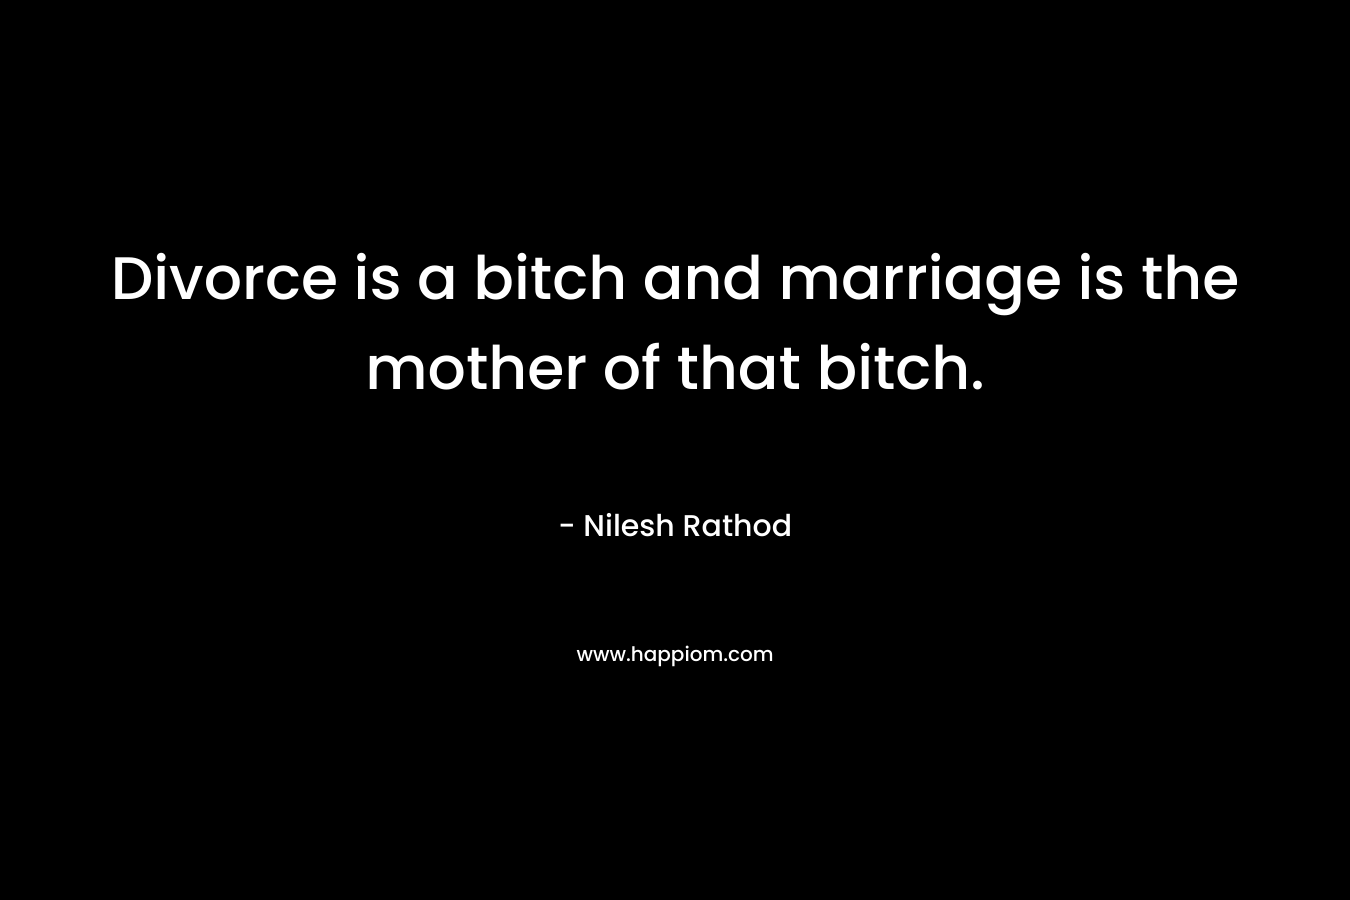 Divorce is a bitch and marriage is the mother of that bitch.